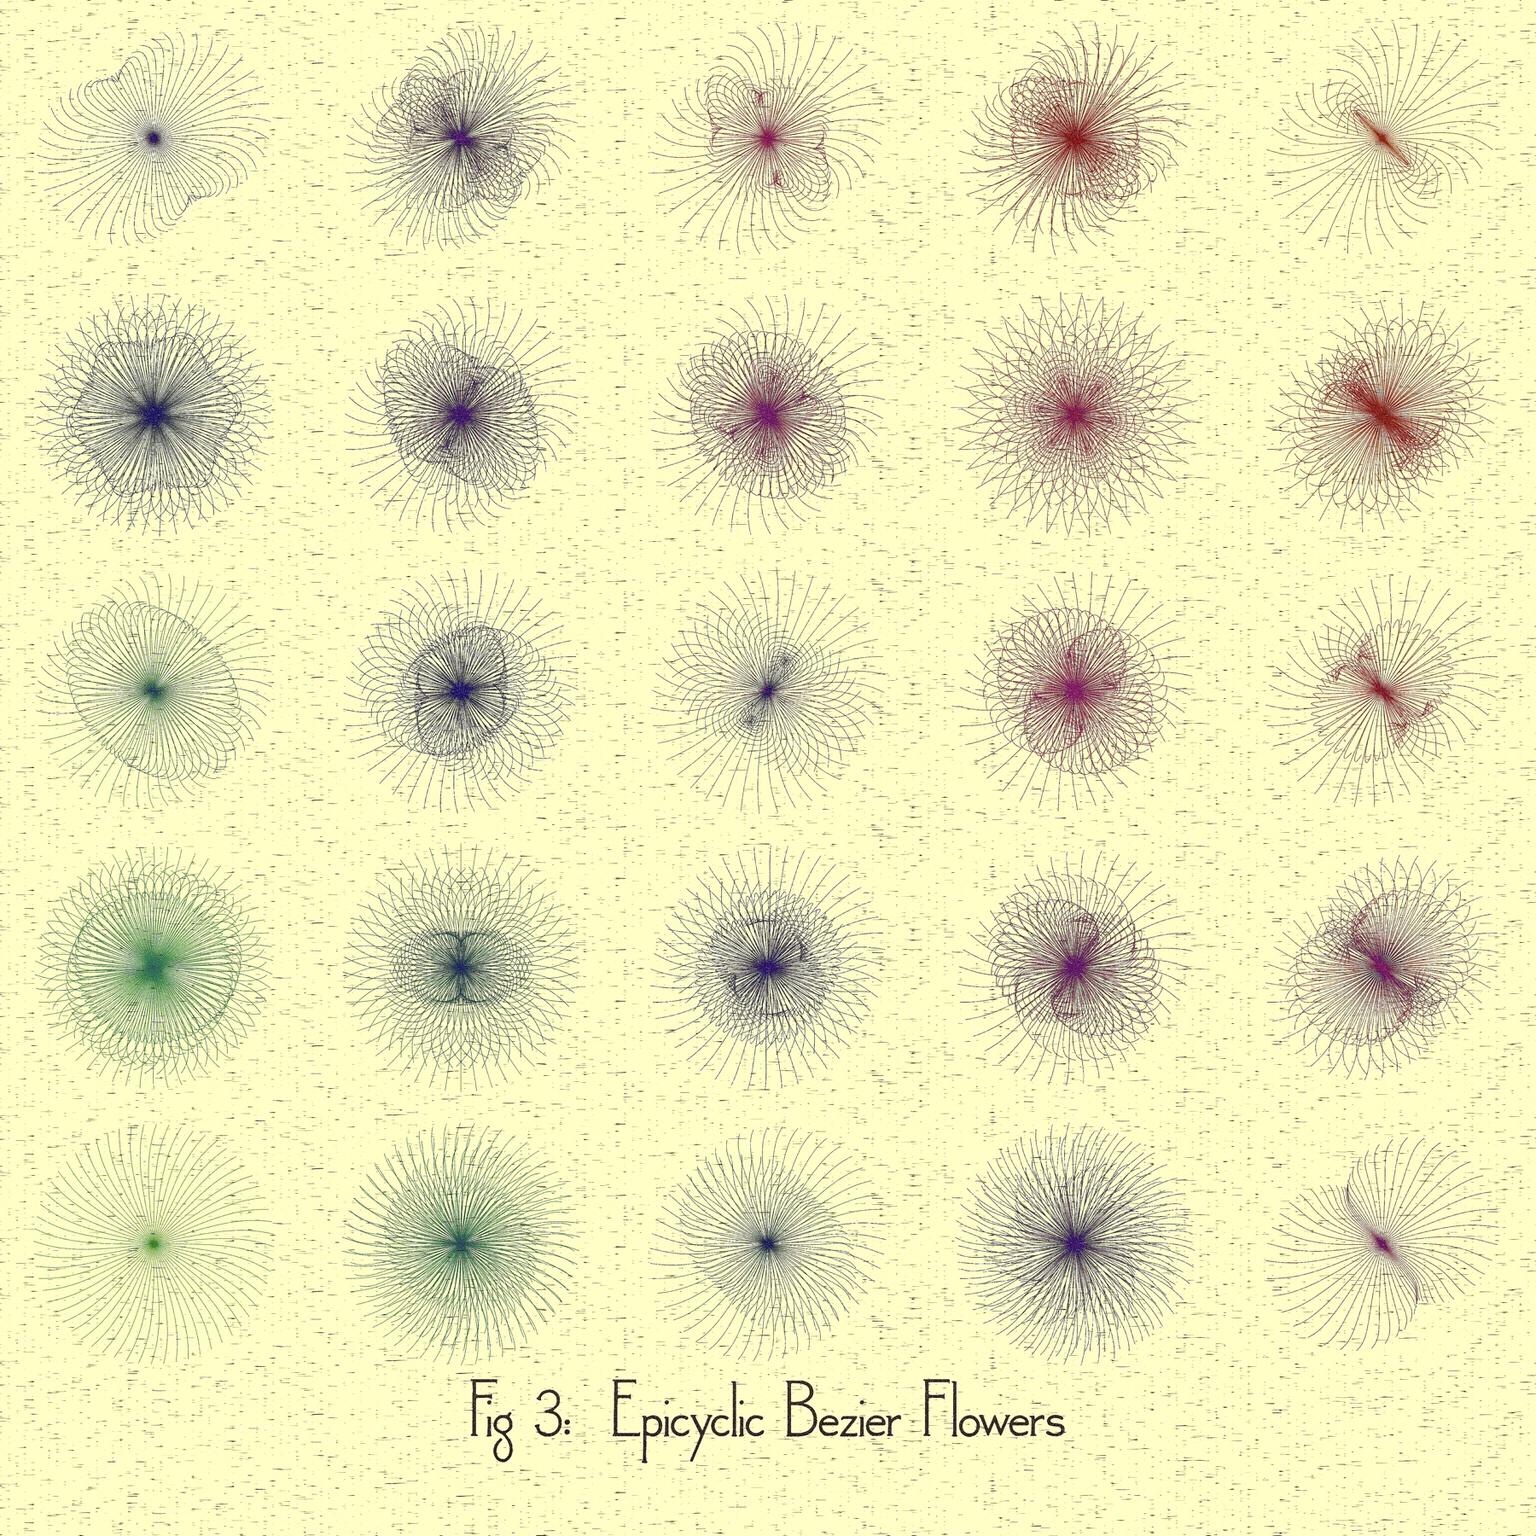 Image for entry 'Epicylic Bezier Flowers (Fig 3)'